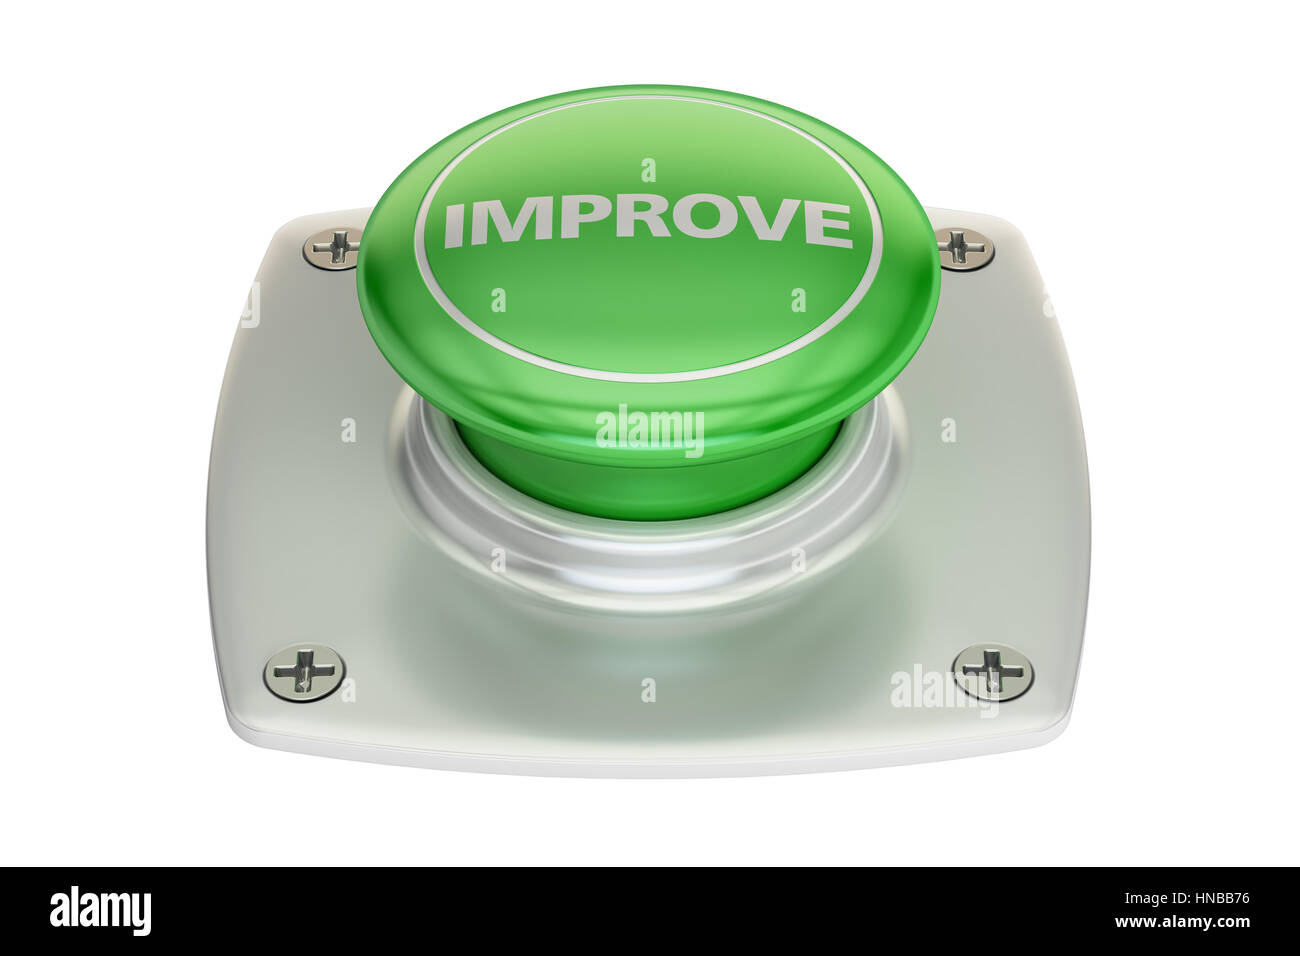 Improve green button, 3D rendering isolated on white background Stock Photo